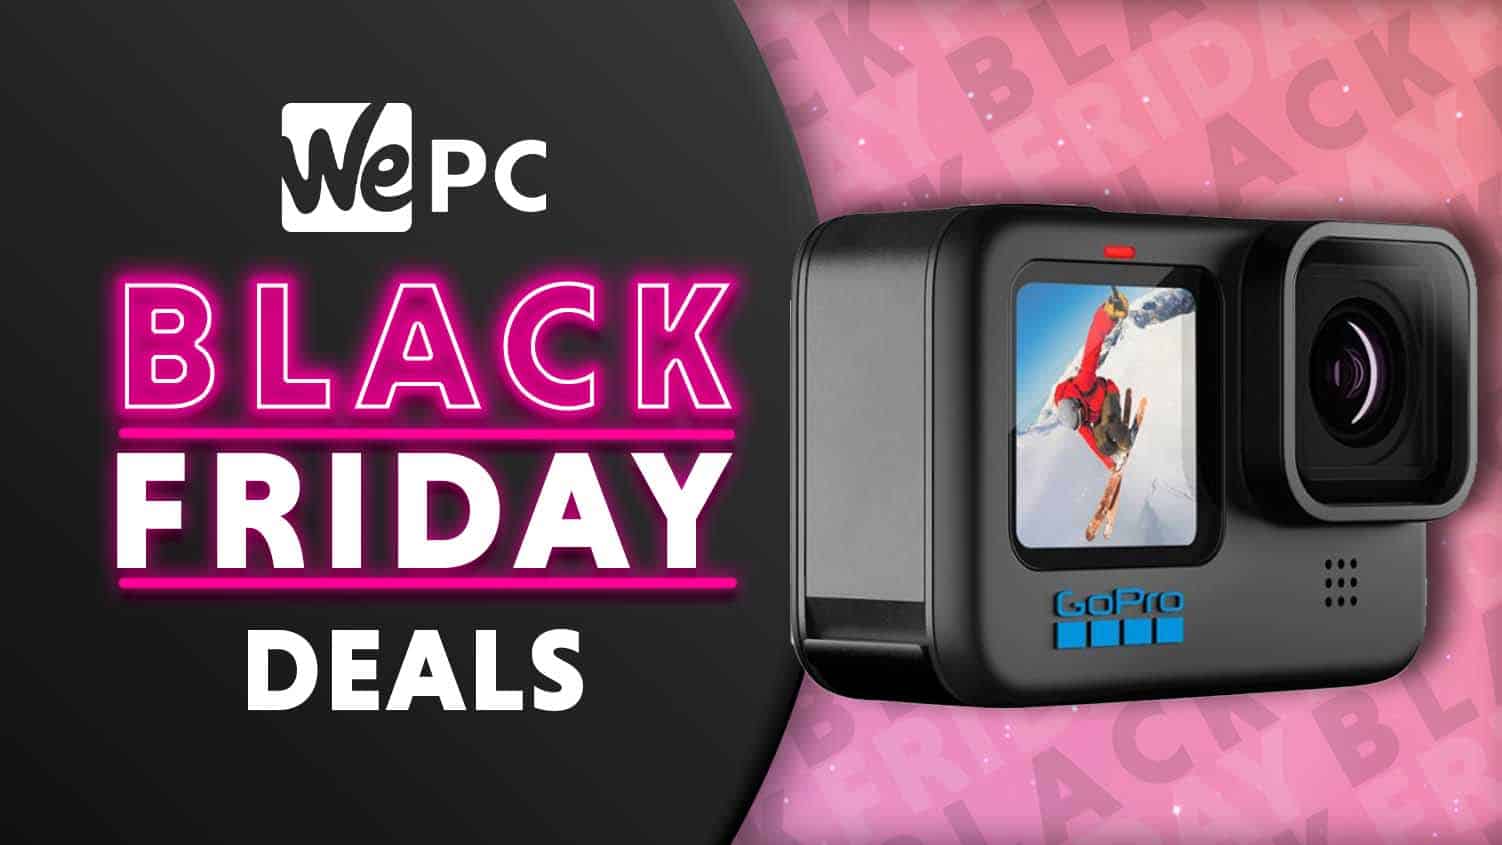 Save $50 on Go Pro HERO10 early Black Friday deal